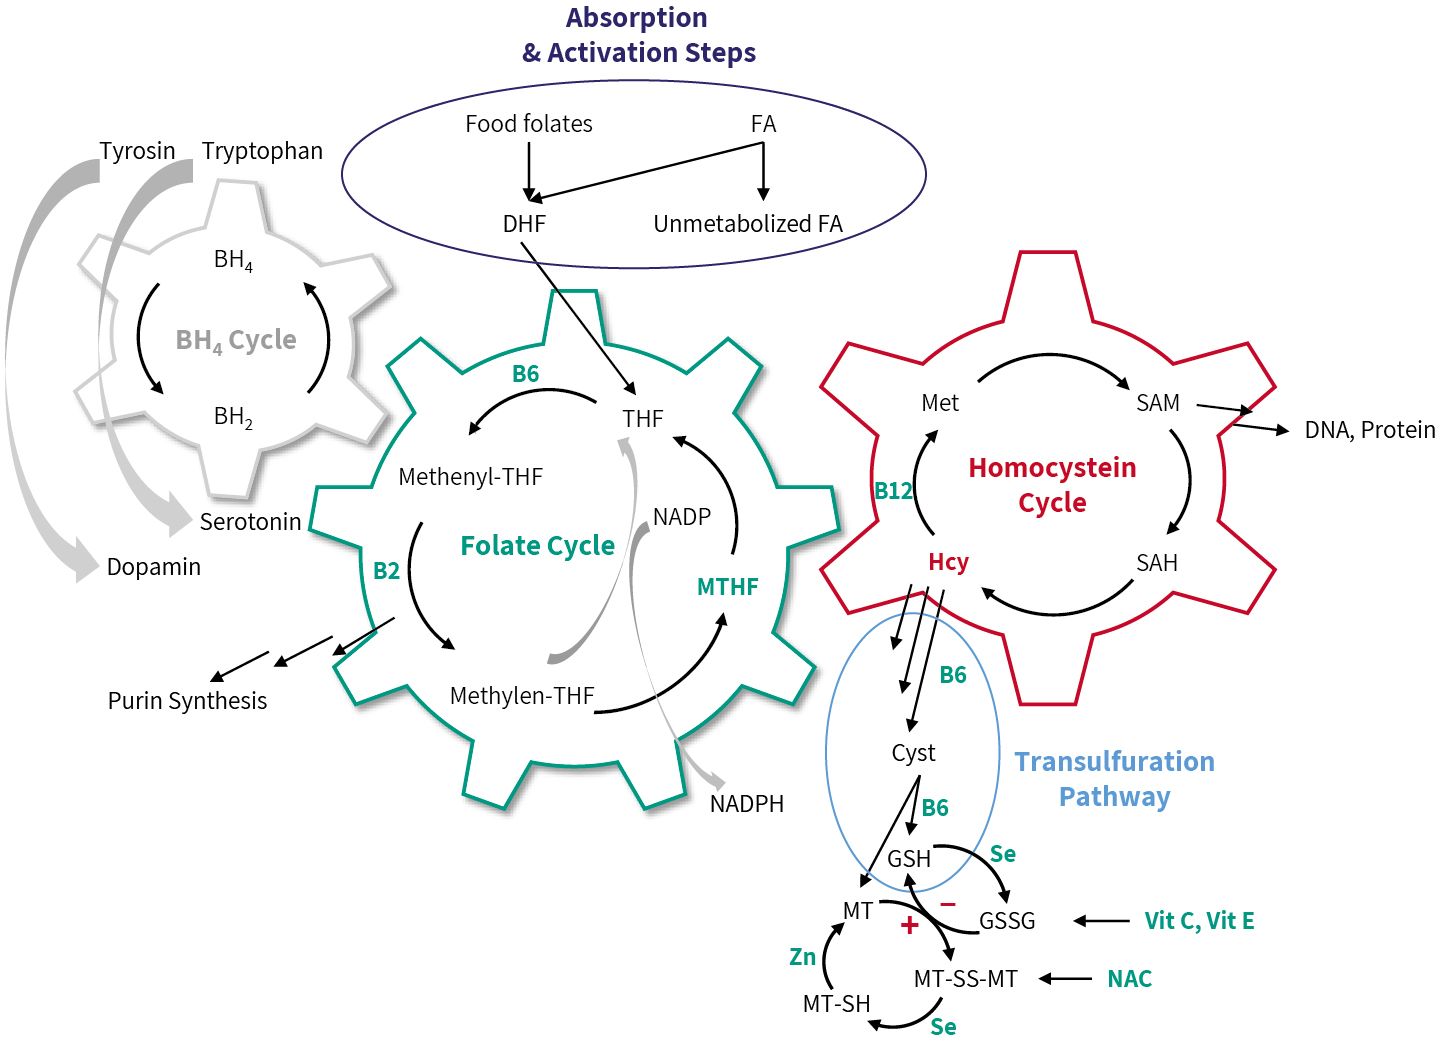 Composition in Metabolic Cycles